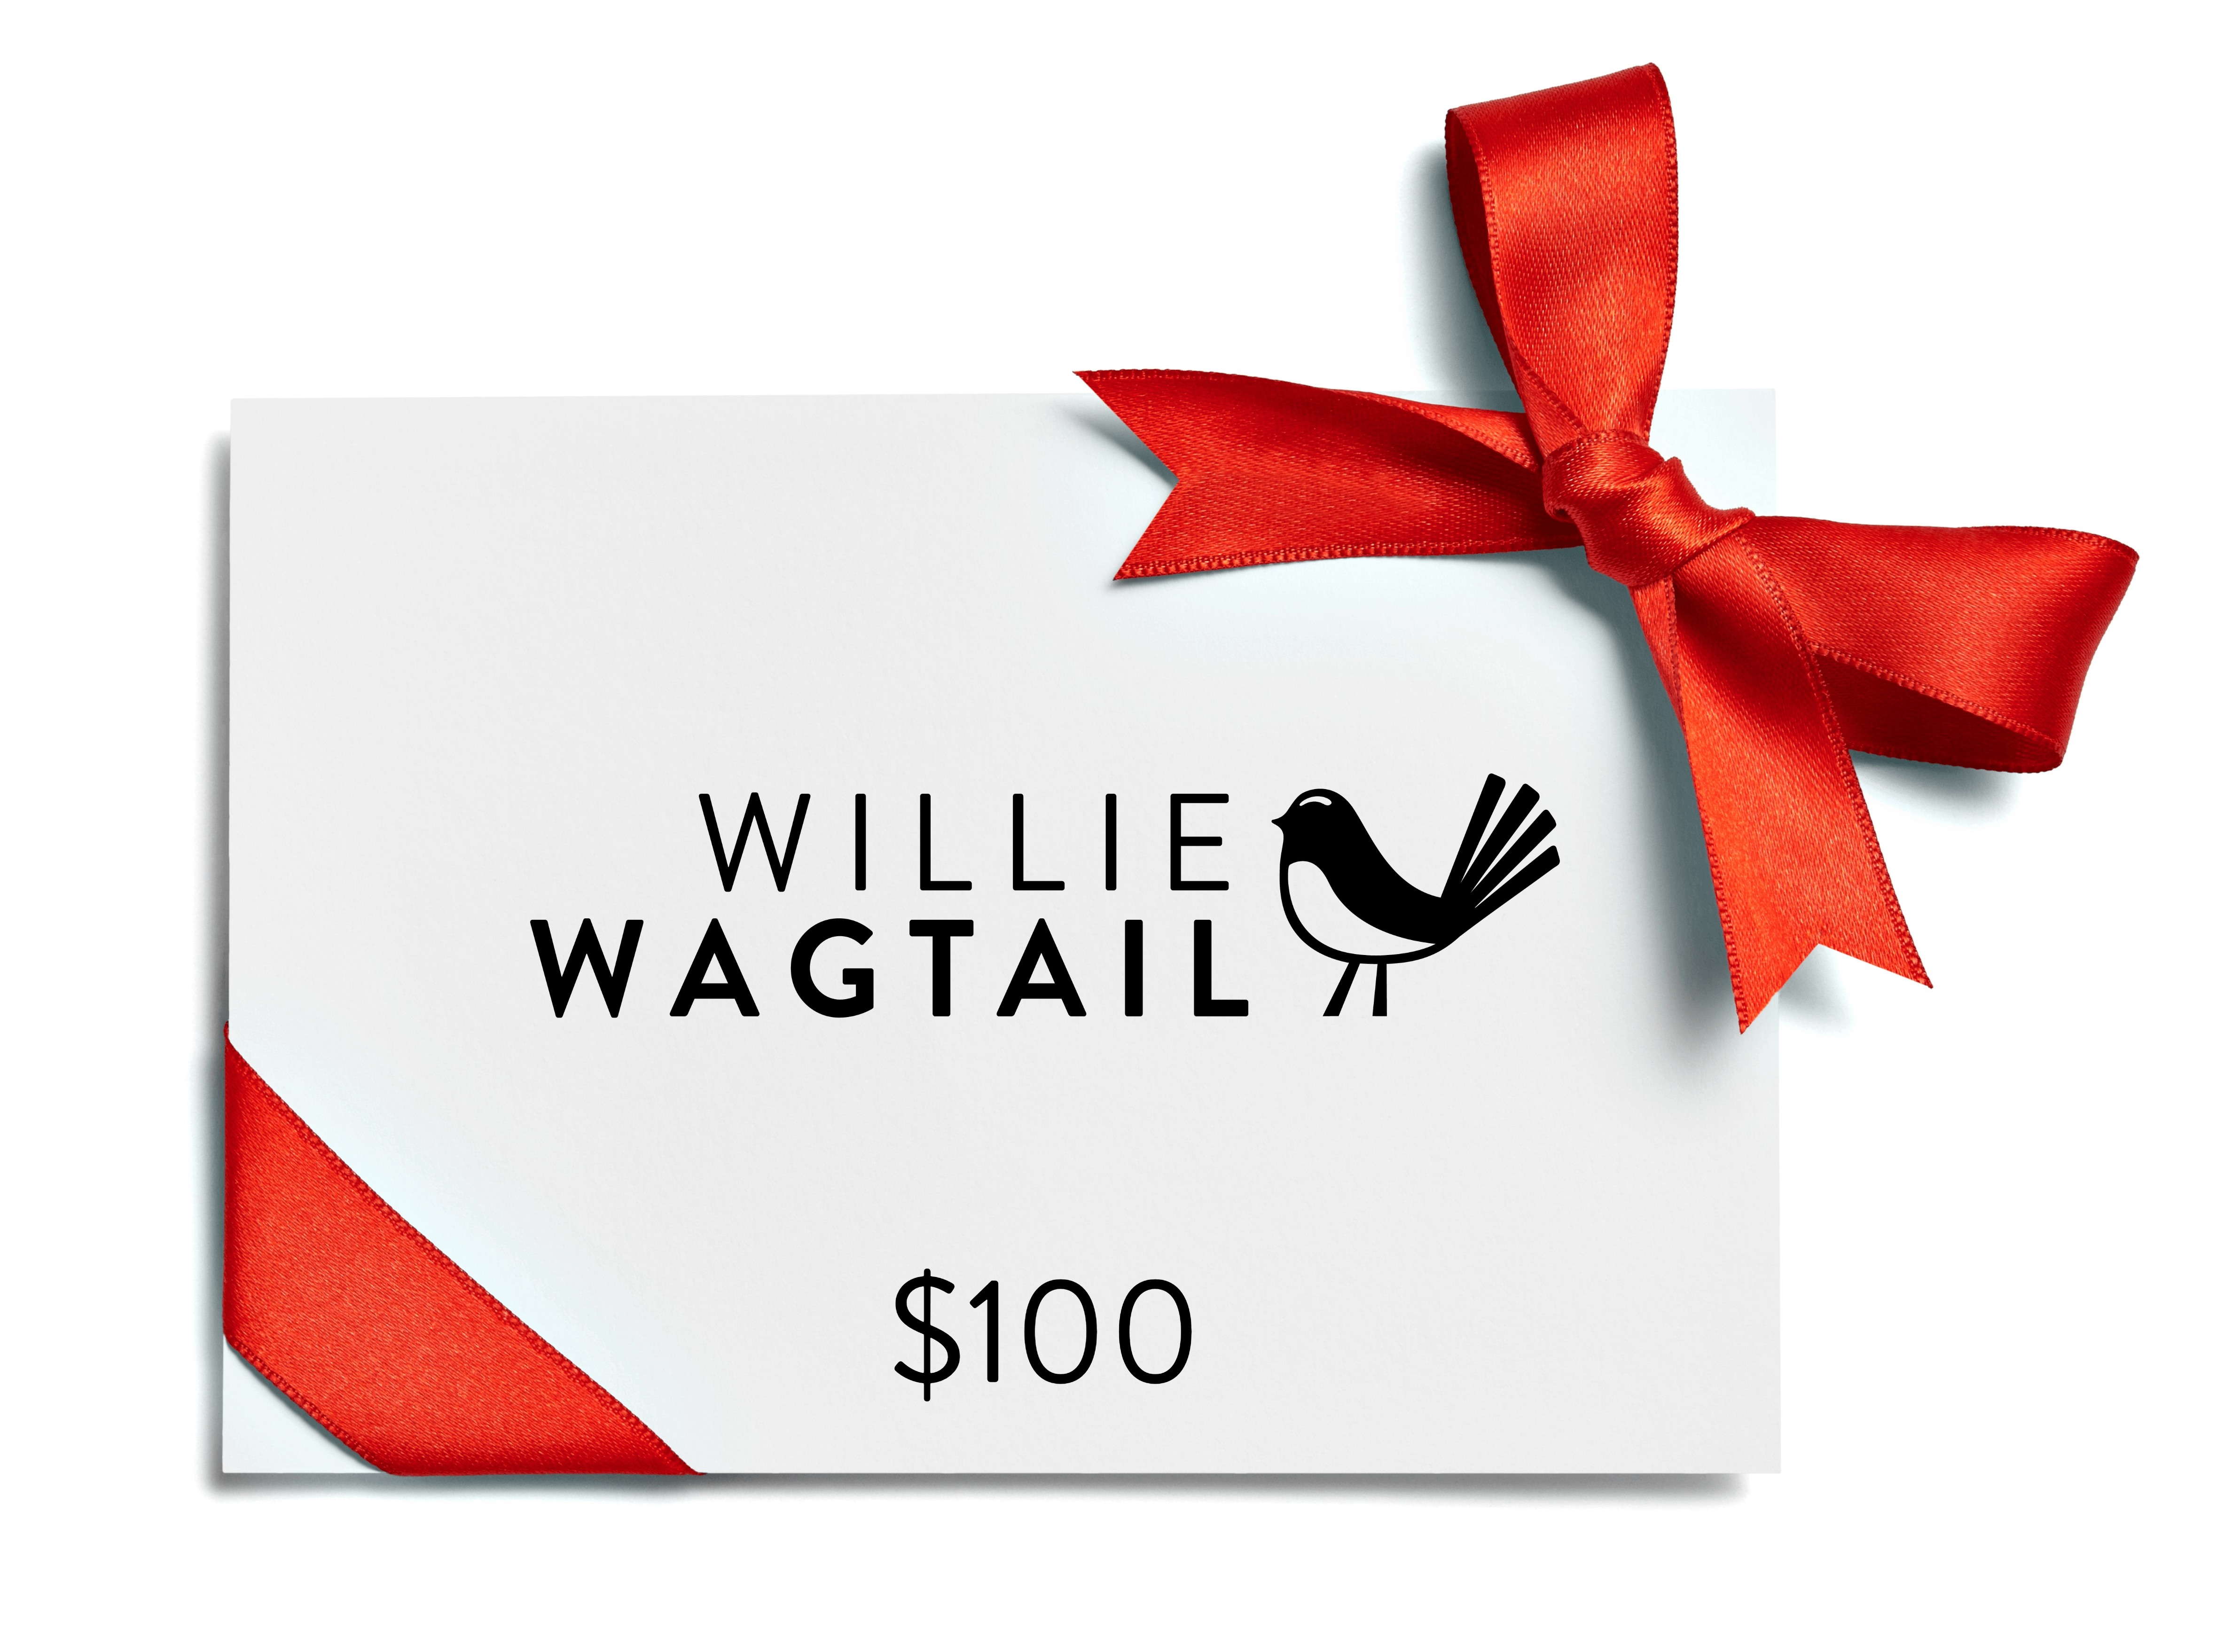 Willie Wagtail Digital Gift Card - Willie Wagtail